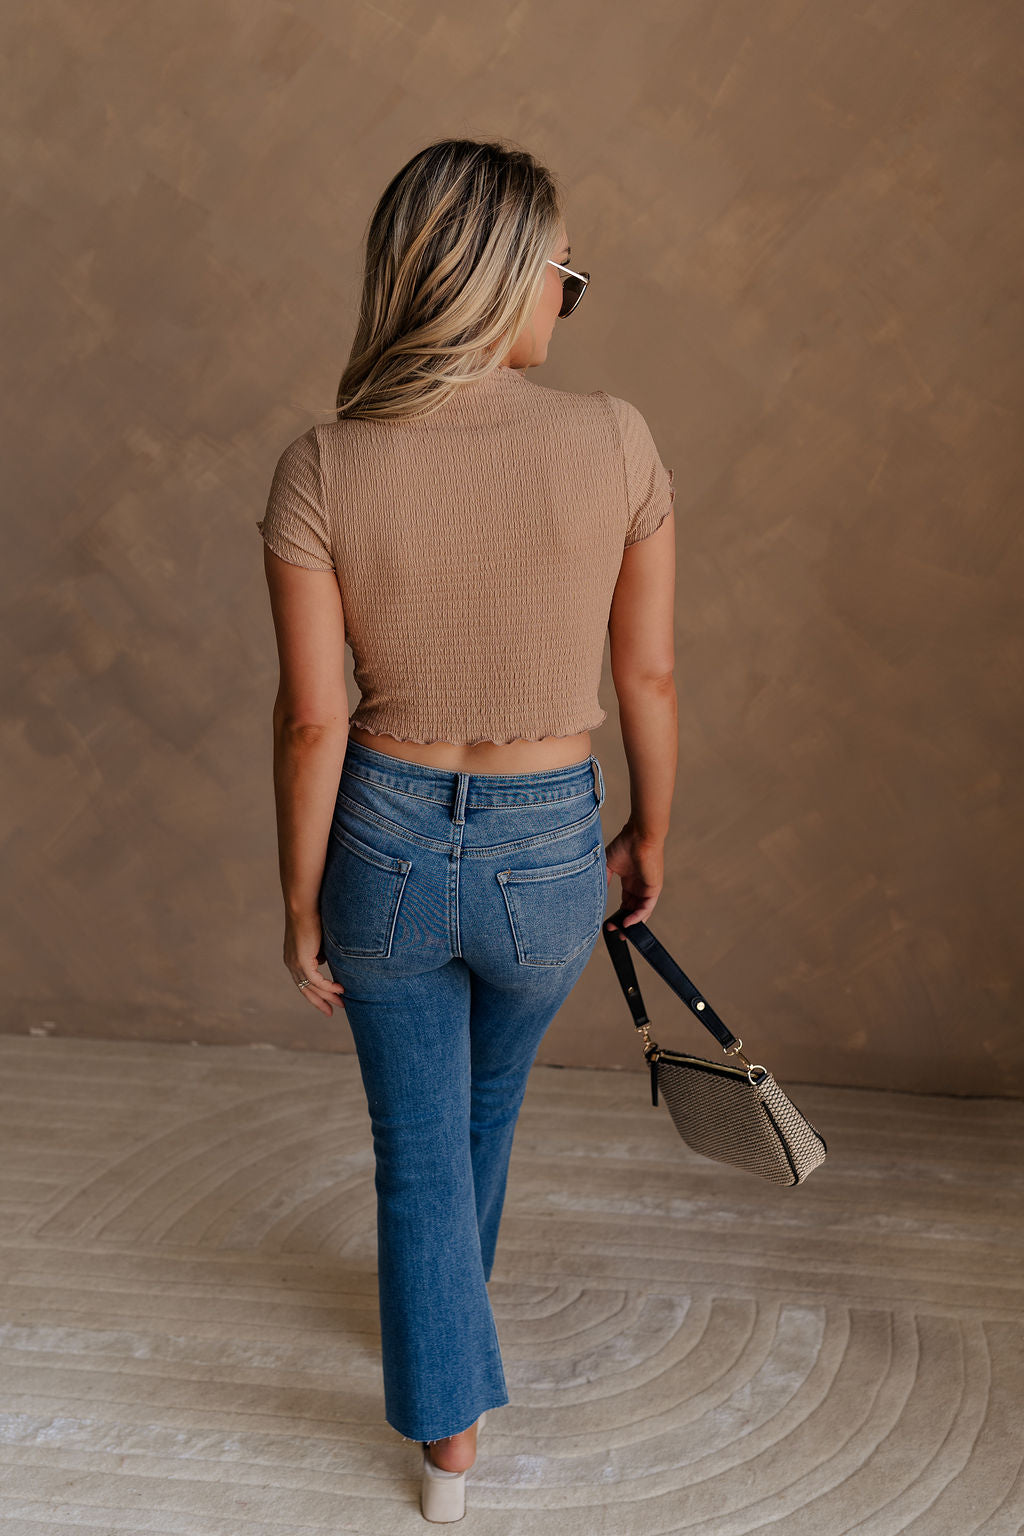 Full body back view of female model wearing the Nora Smocked Lettuce Hem Short Sleeve Top in tan that has stretchy textured fabric, lettuce trim, short sleeves, and a cropped fit.